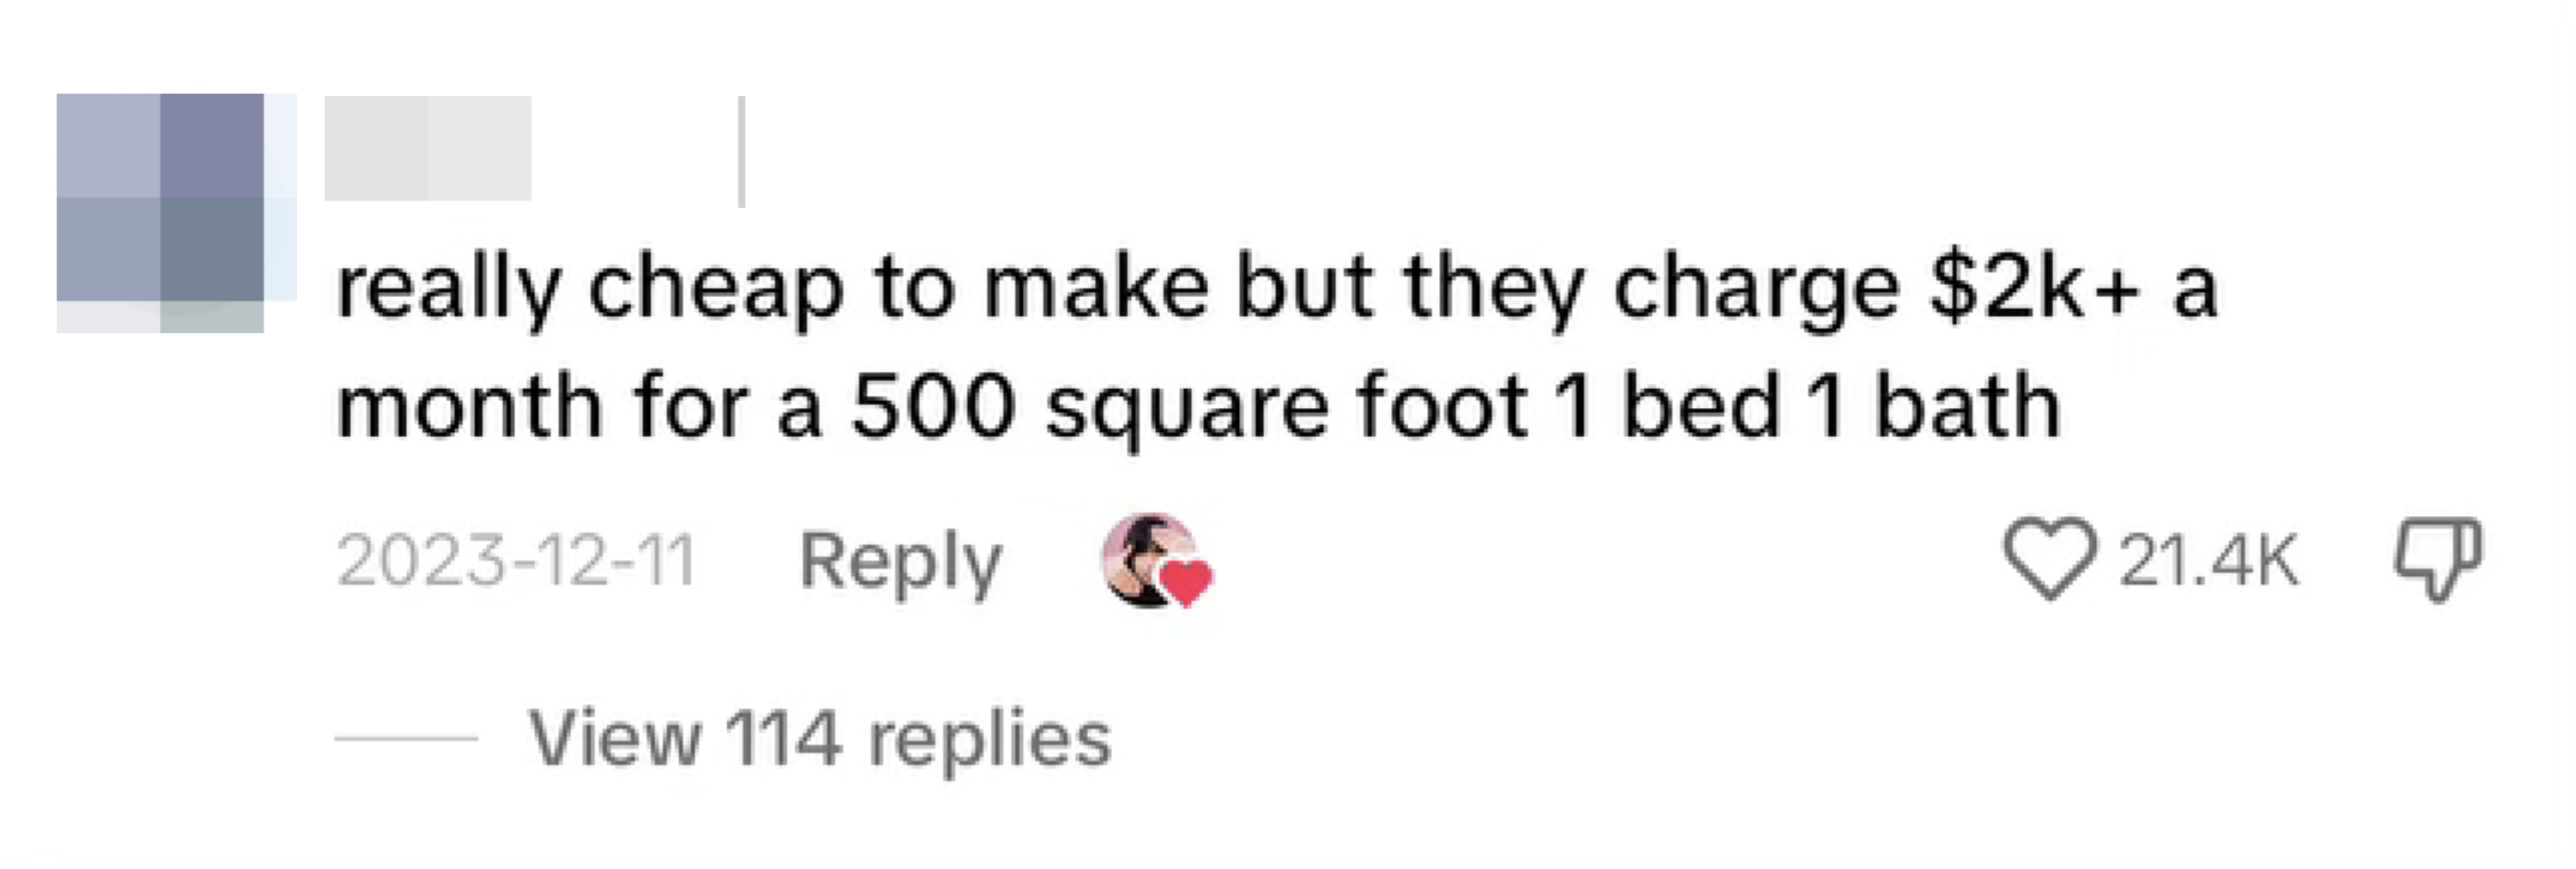 Comment saying &quot;really cheap to make but they charge $2k+ a month for a 500 square foot 1 bed 1 bath&quot;